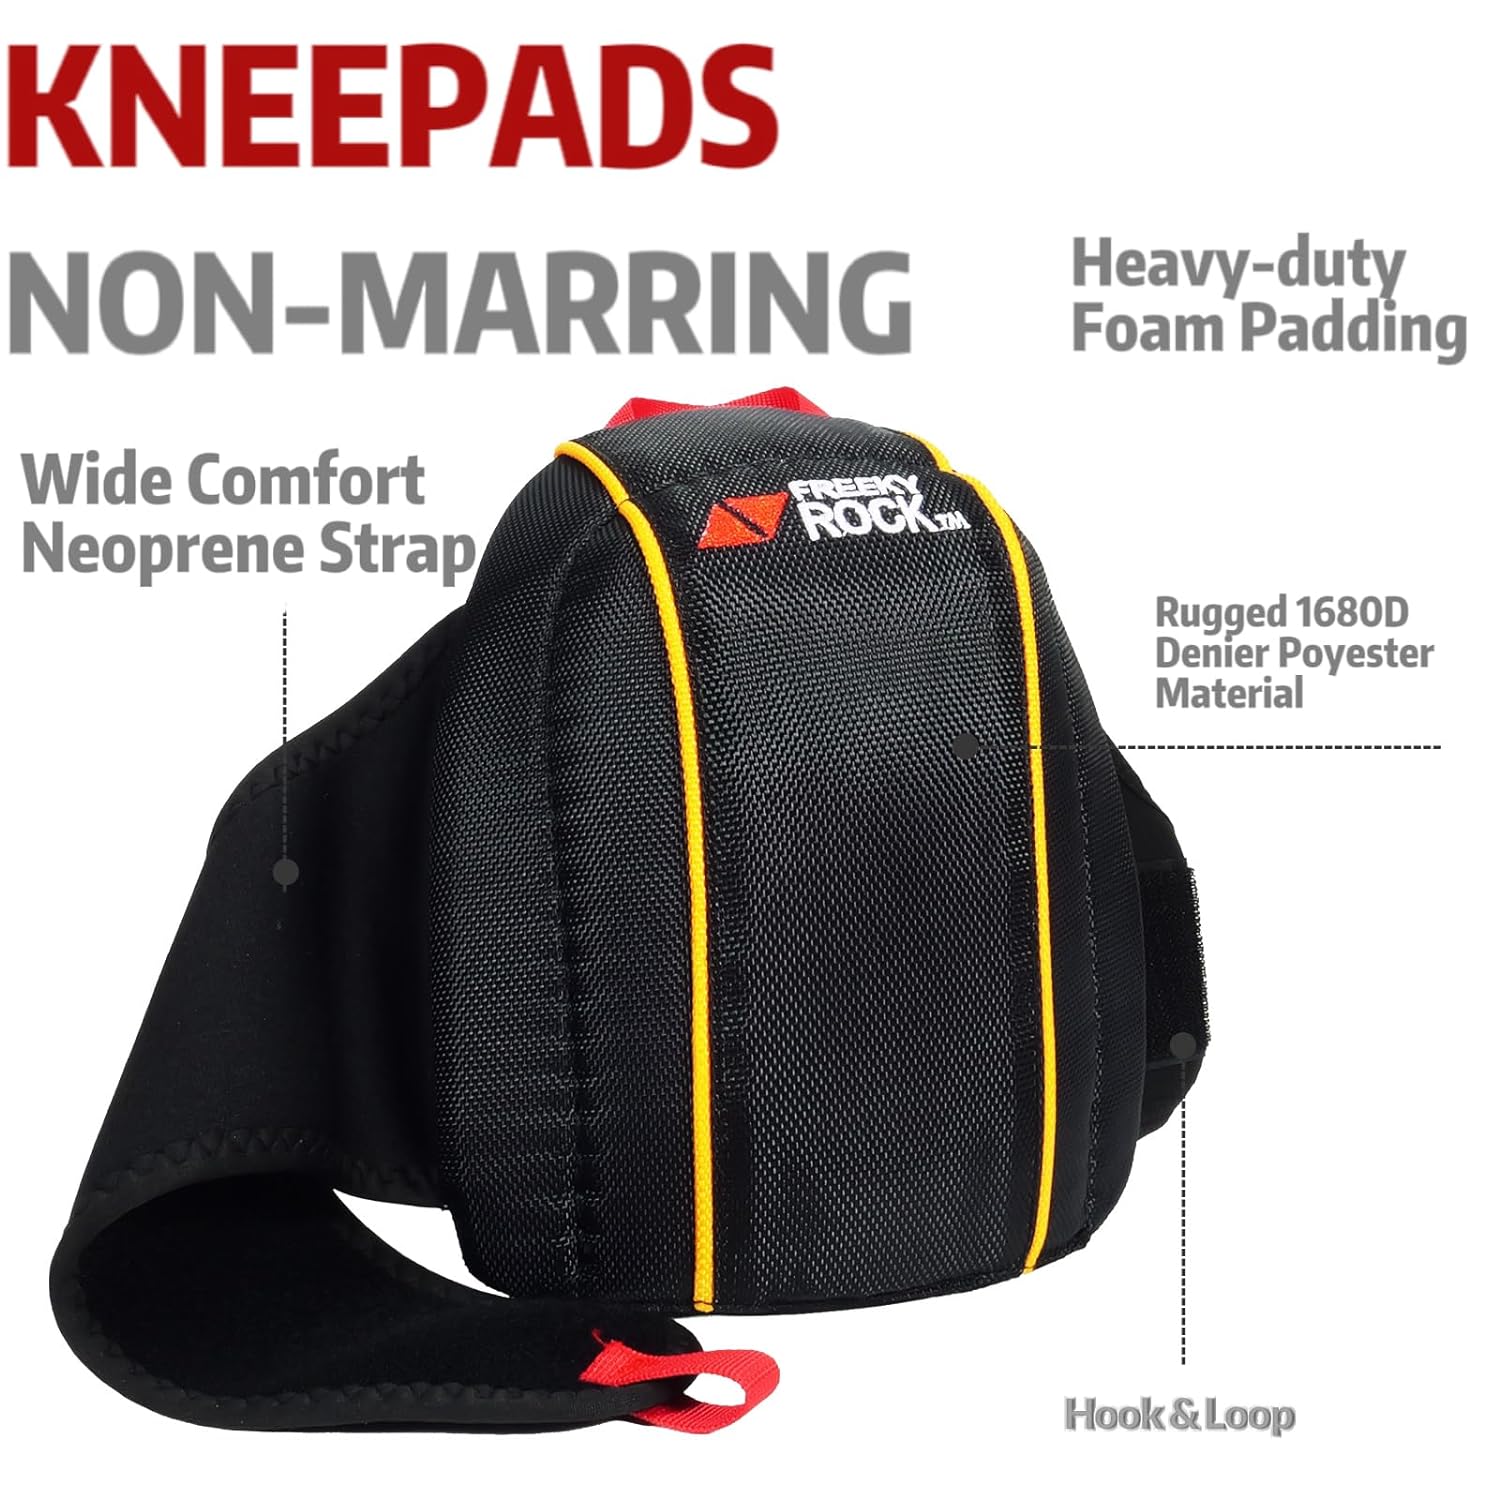 Professional Outdoor & Indoor Knee Pads for Women Men - Lightweight & Comfortable Knee Pad for Flooring,Rooftop，Anti-Slip Collision Avoidance Kneepads with Thick EVA Foam for House Cleaning, Light Construction Work & Volleyball